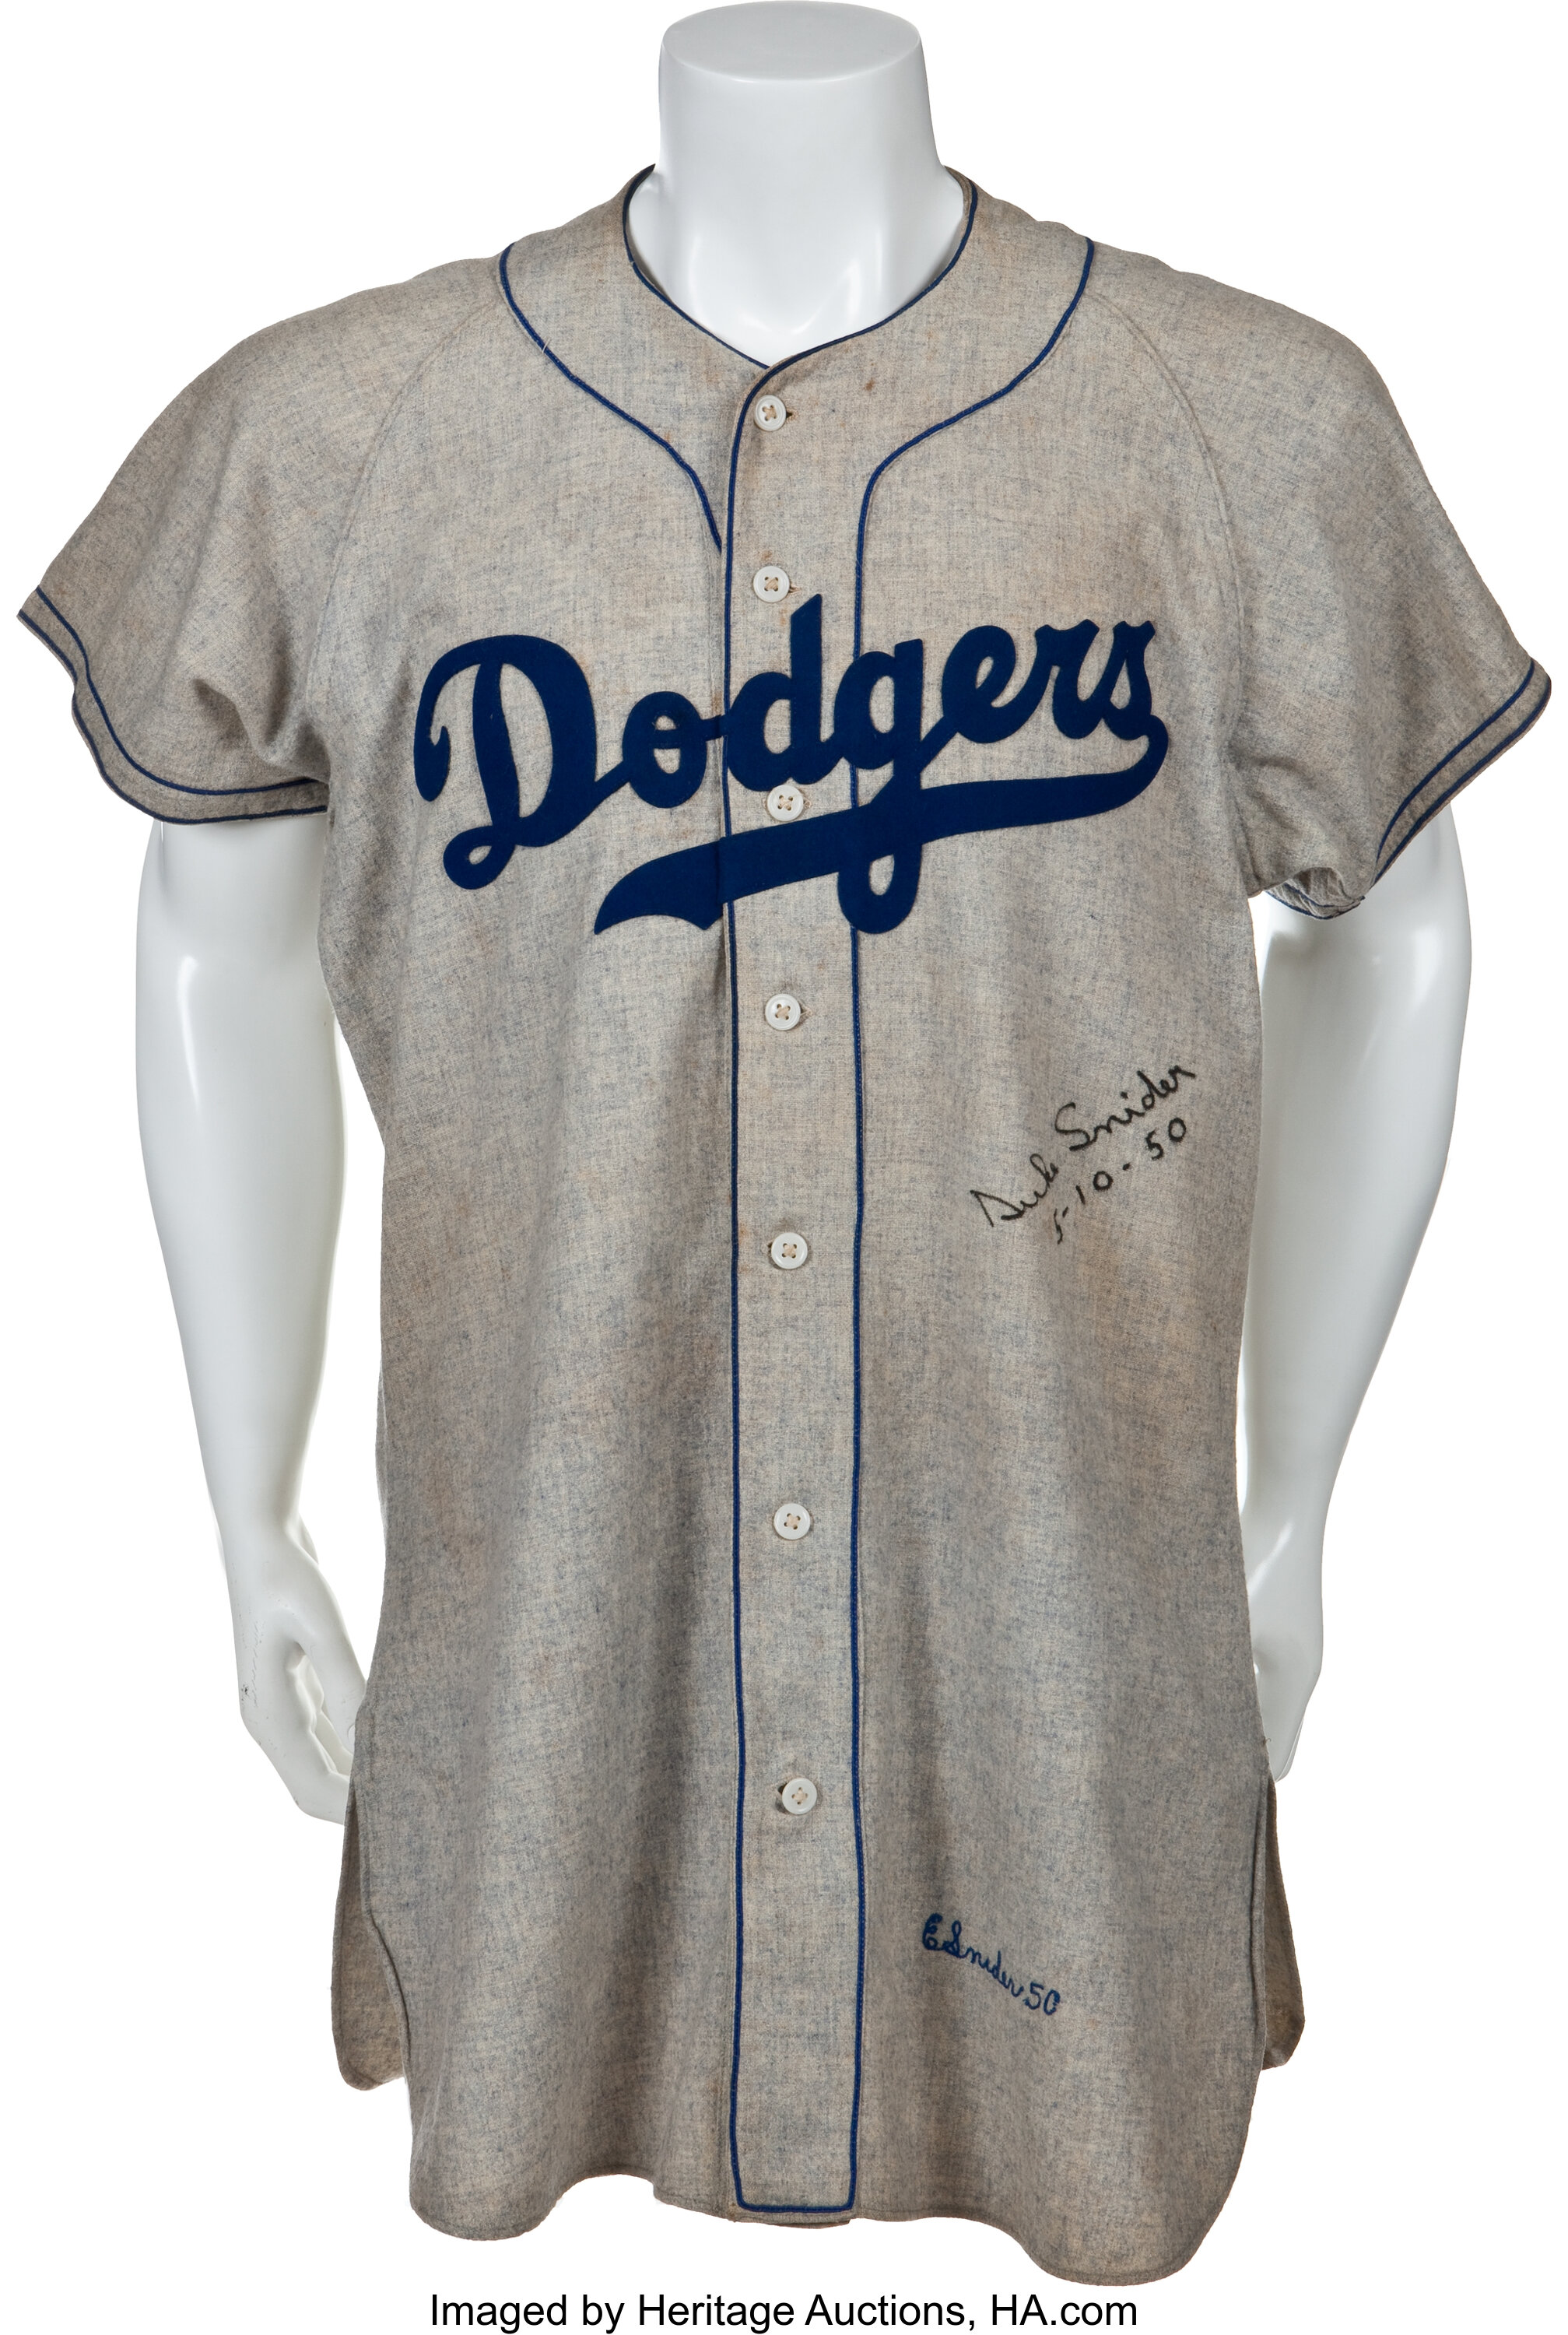 Brooklyn Dodgers Duke Snyder Jersey size L – Mr. Throwback NYC